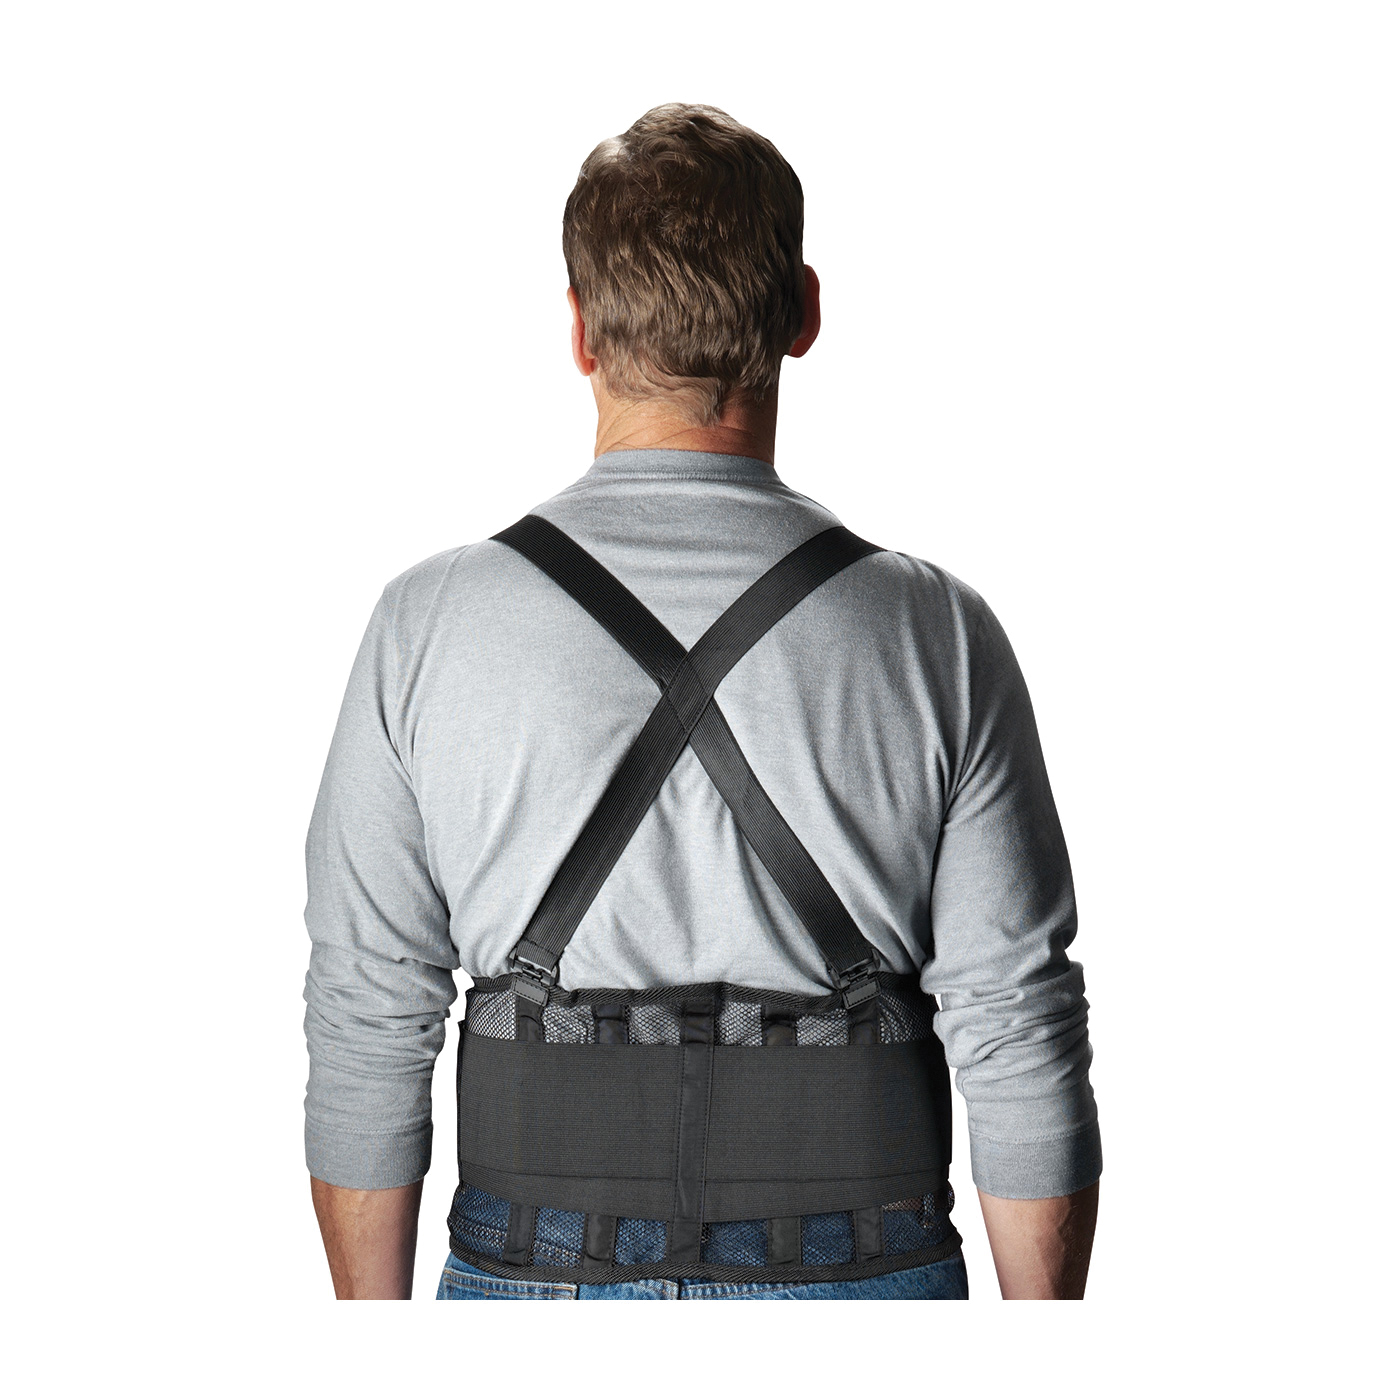 PIP® 290-440XL Ergonomic Back Support Belt, XL, 44 to 48 in Fits Waist, 9 in W, Nylon Mesh, Black, Hook and Loop Closure